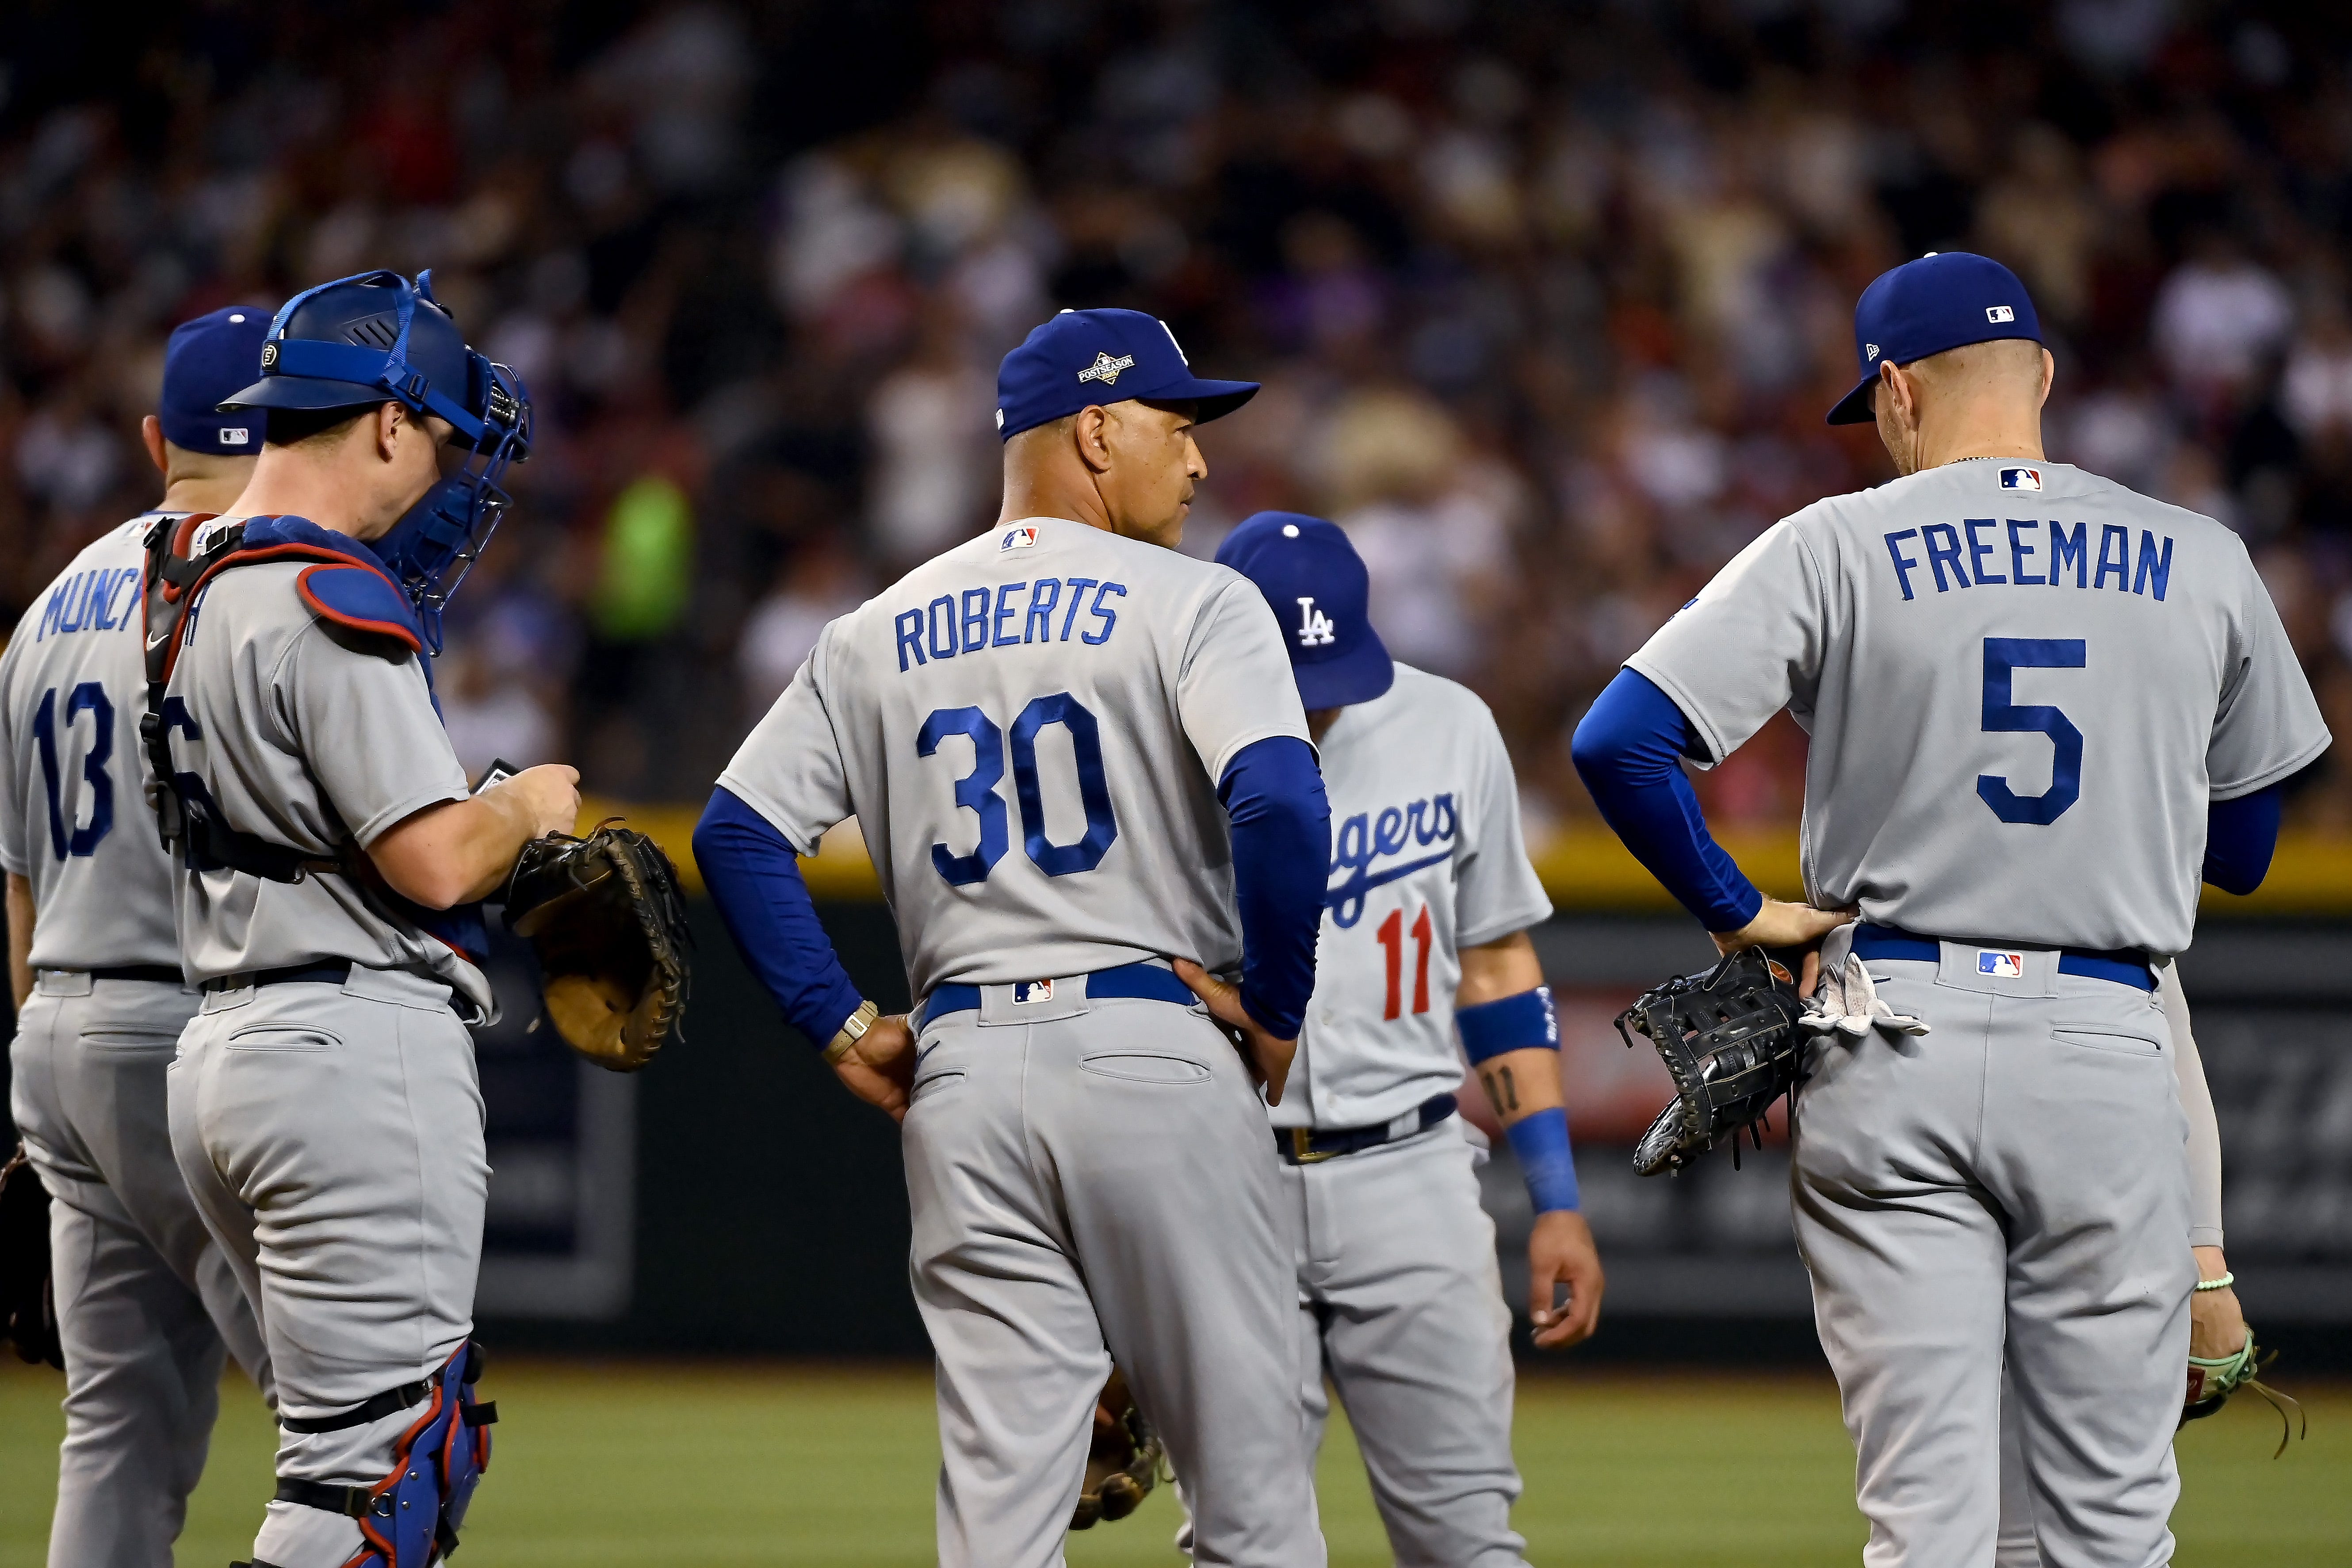 Dodgers Take Another Early Exit From the Postseason Tournament